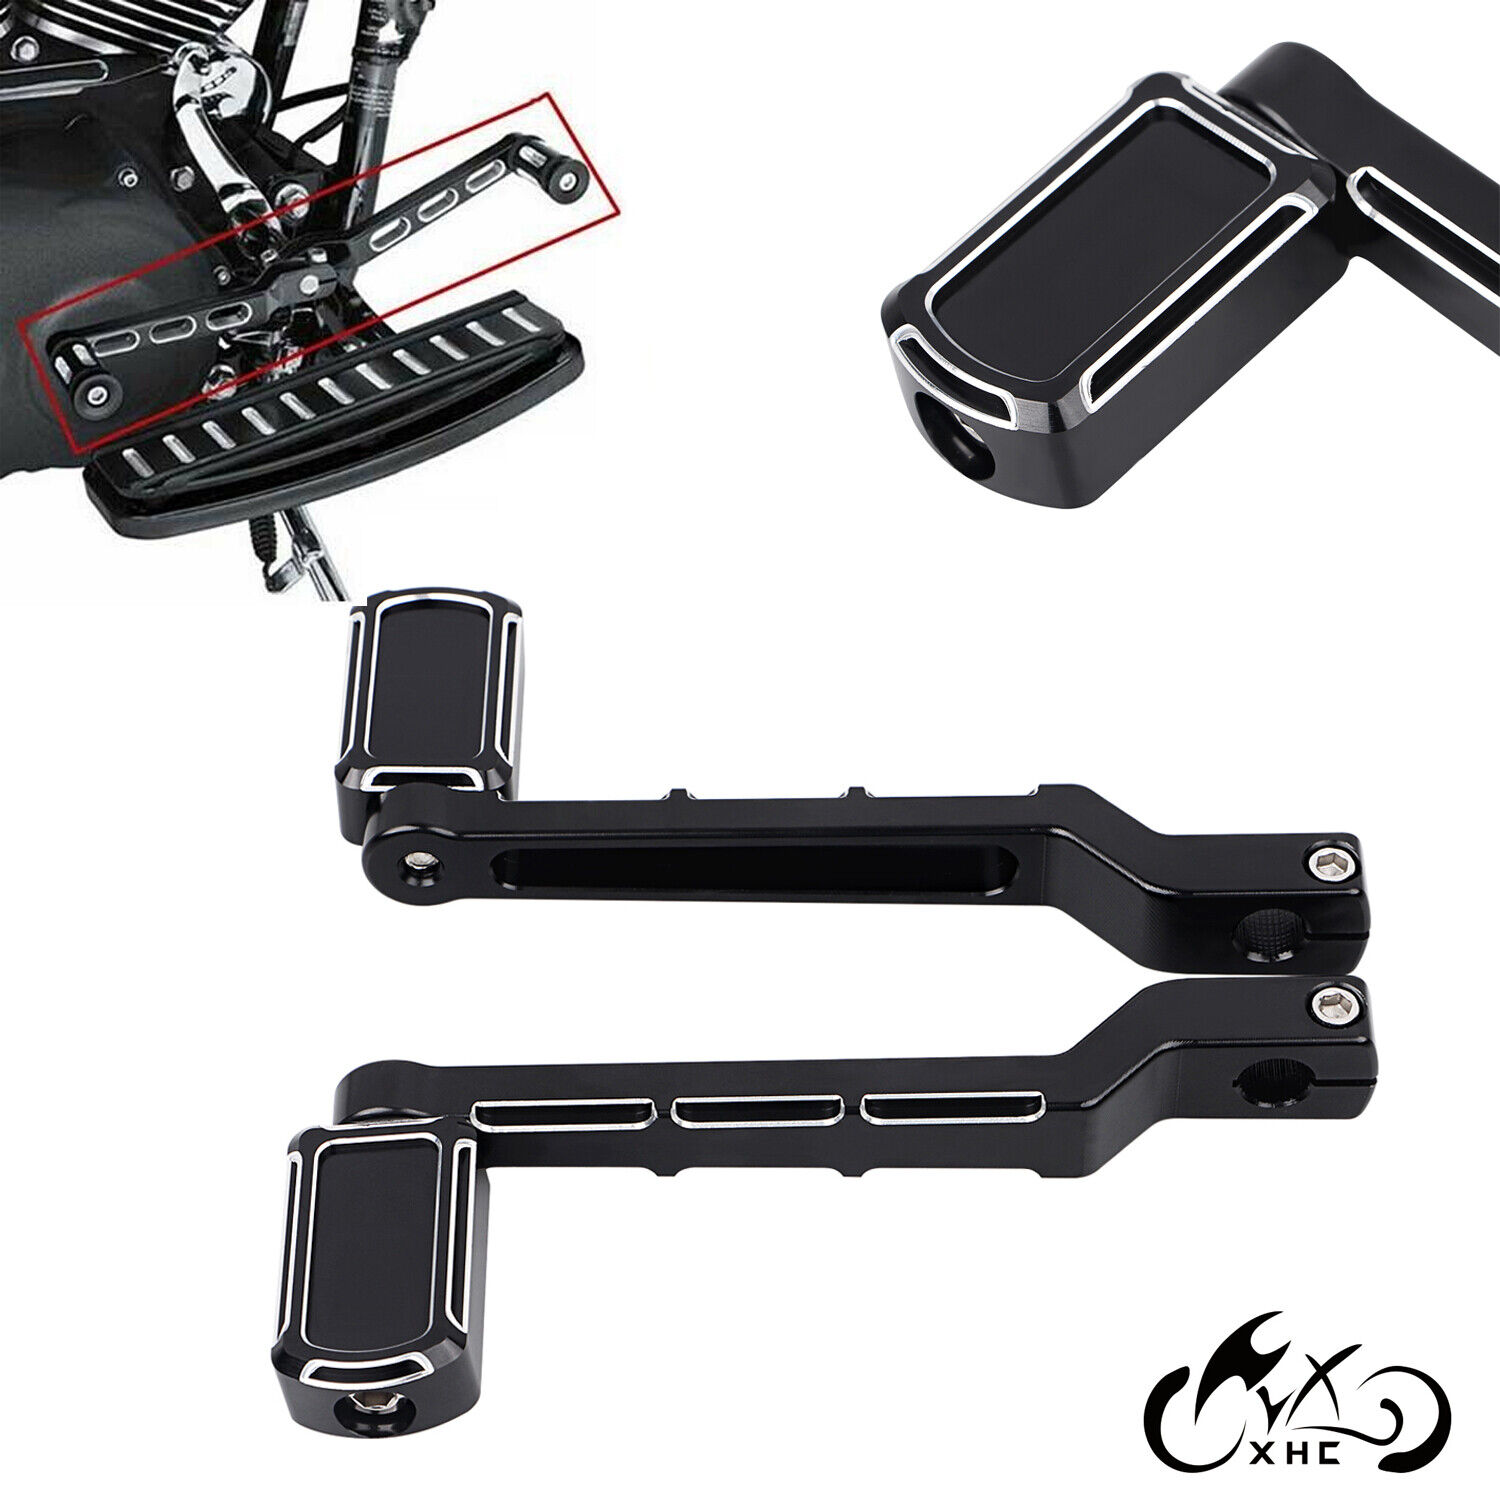 Black Max 59% OFF Heel Toe Shifter Shift Lever Pedal R specialty shop Peg For Harley Street